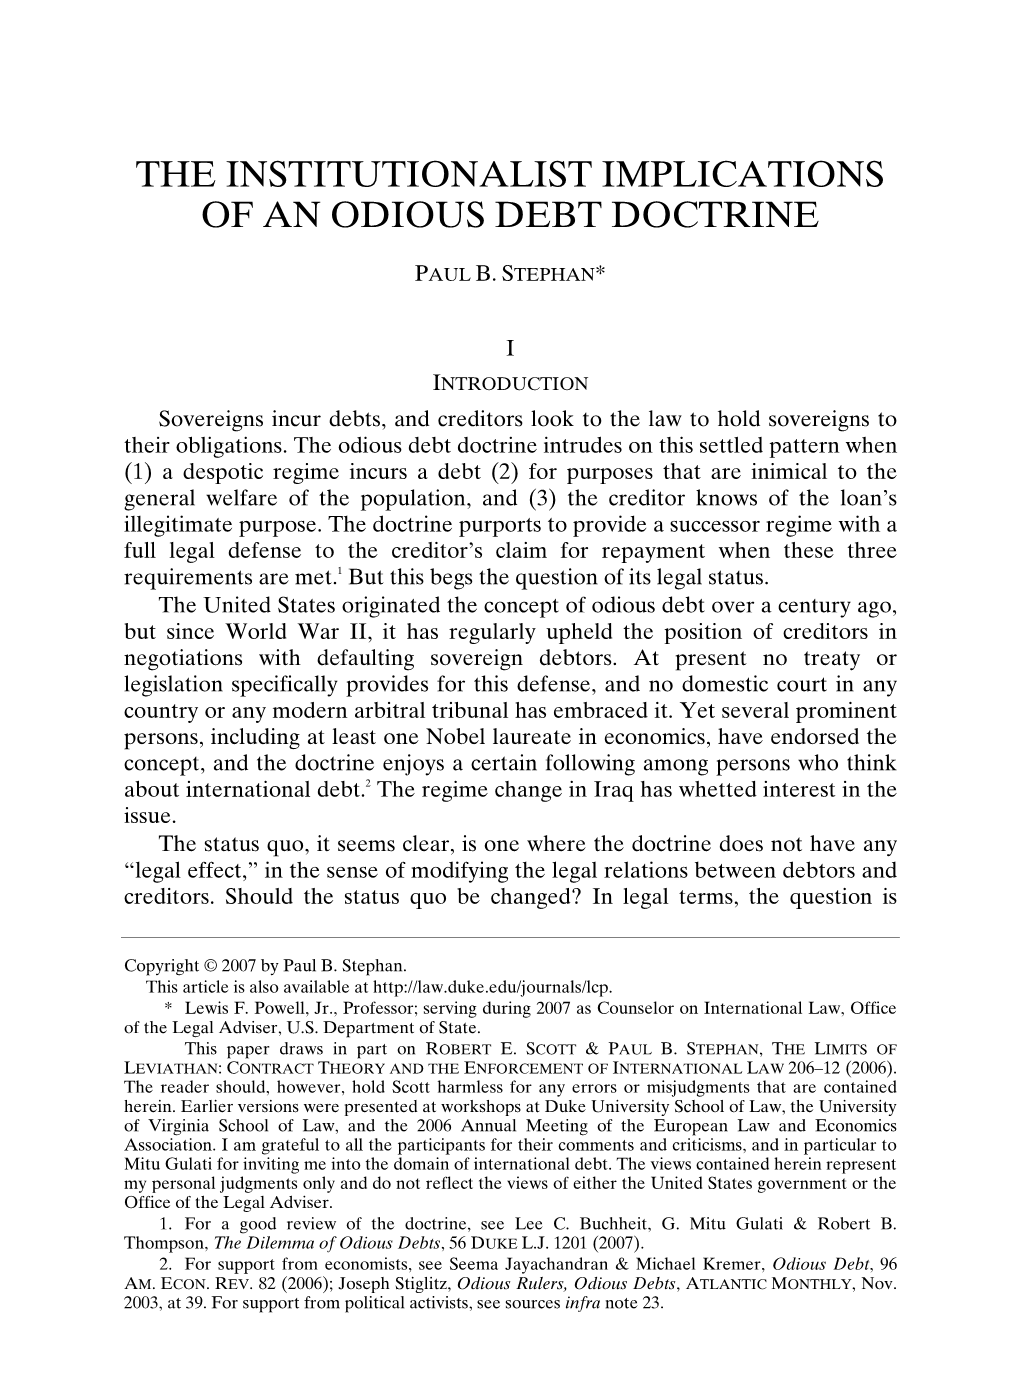 The Institutionalist Implications of an Odious Debt Doctrine